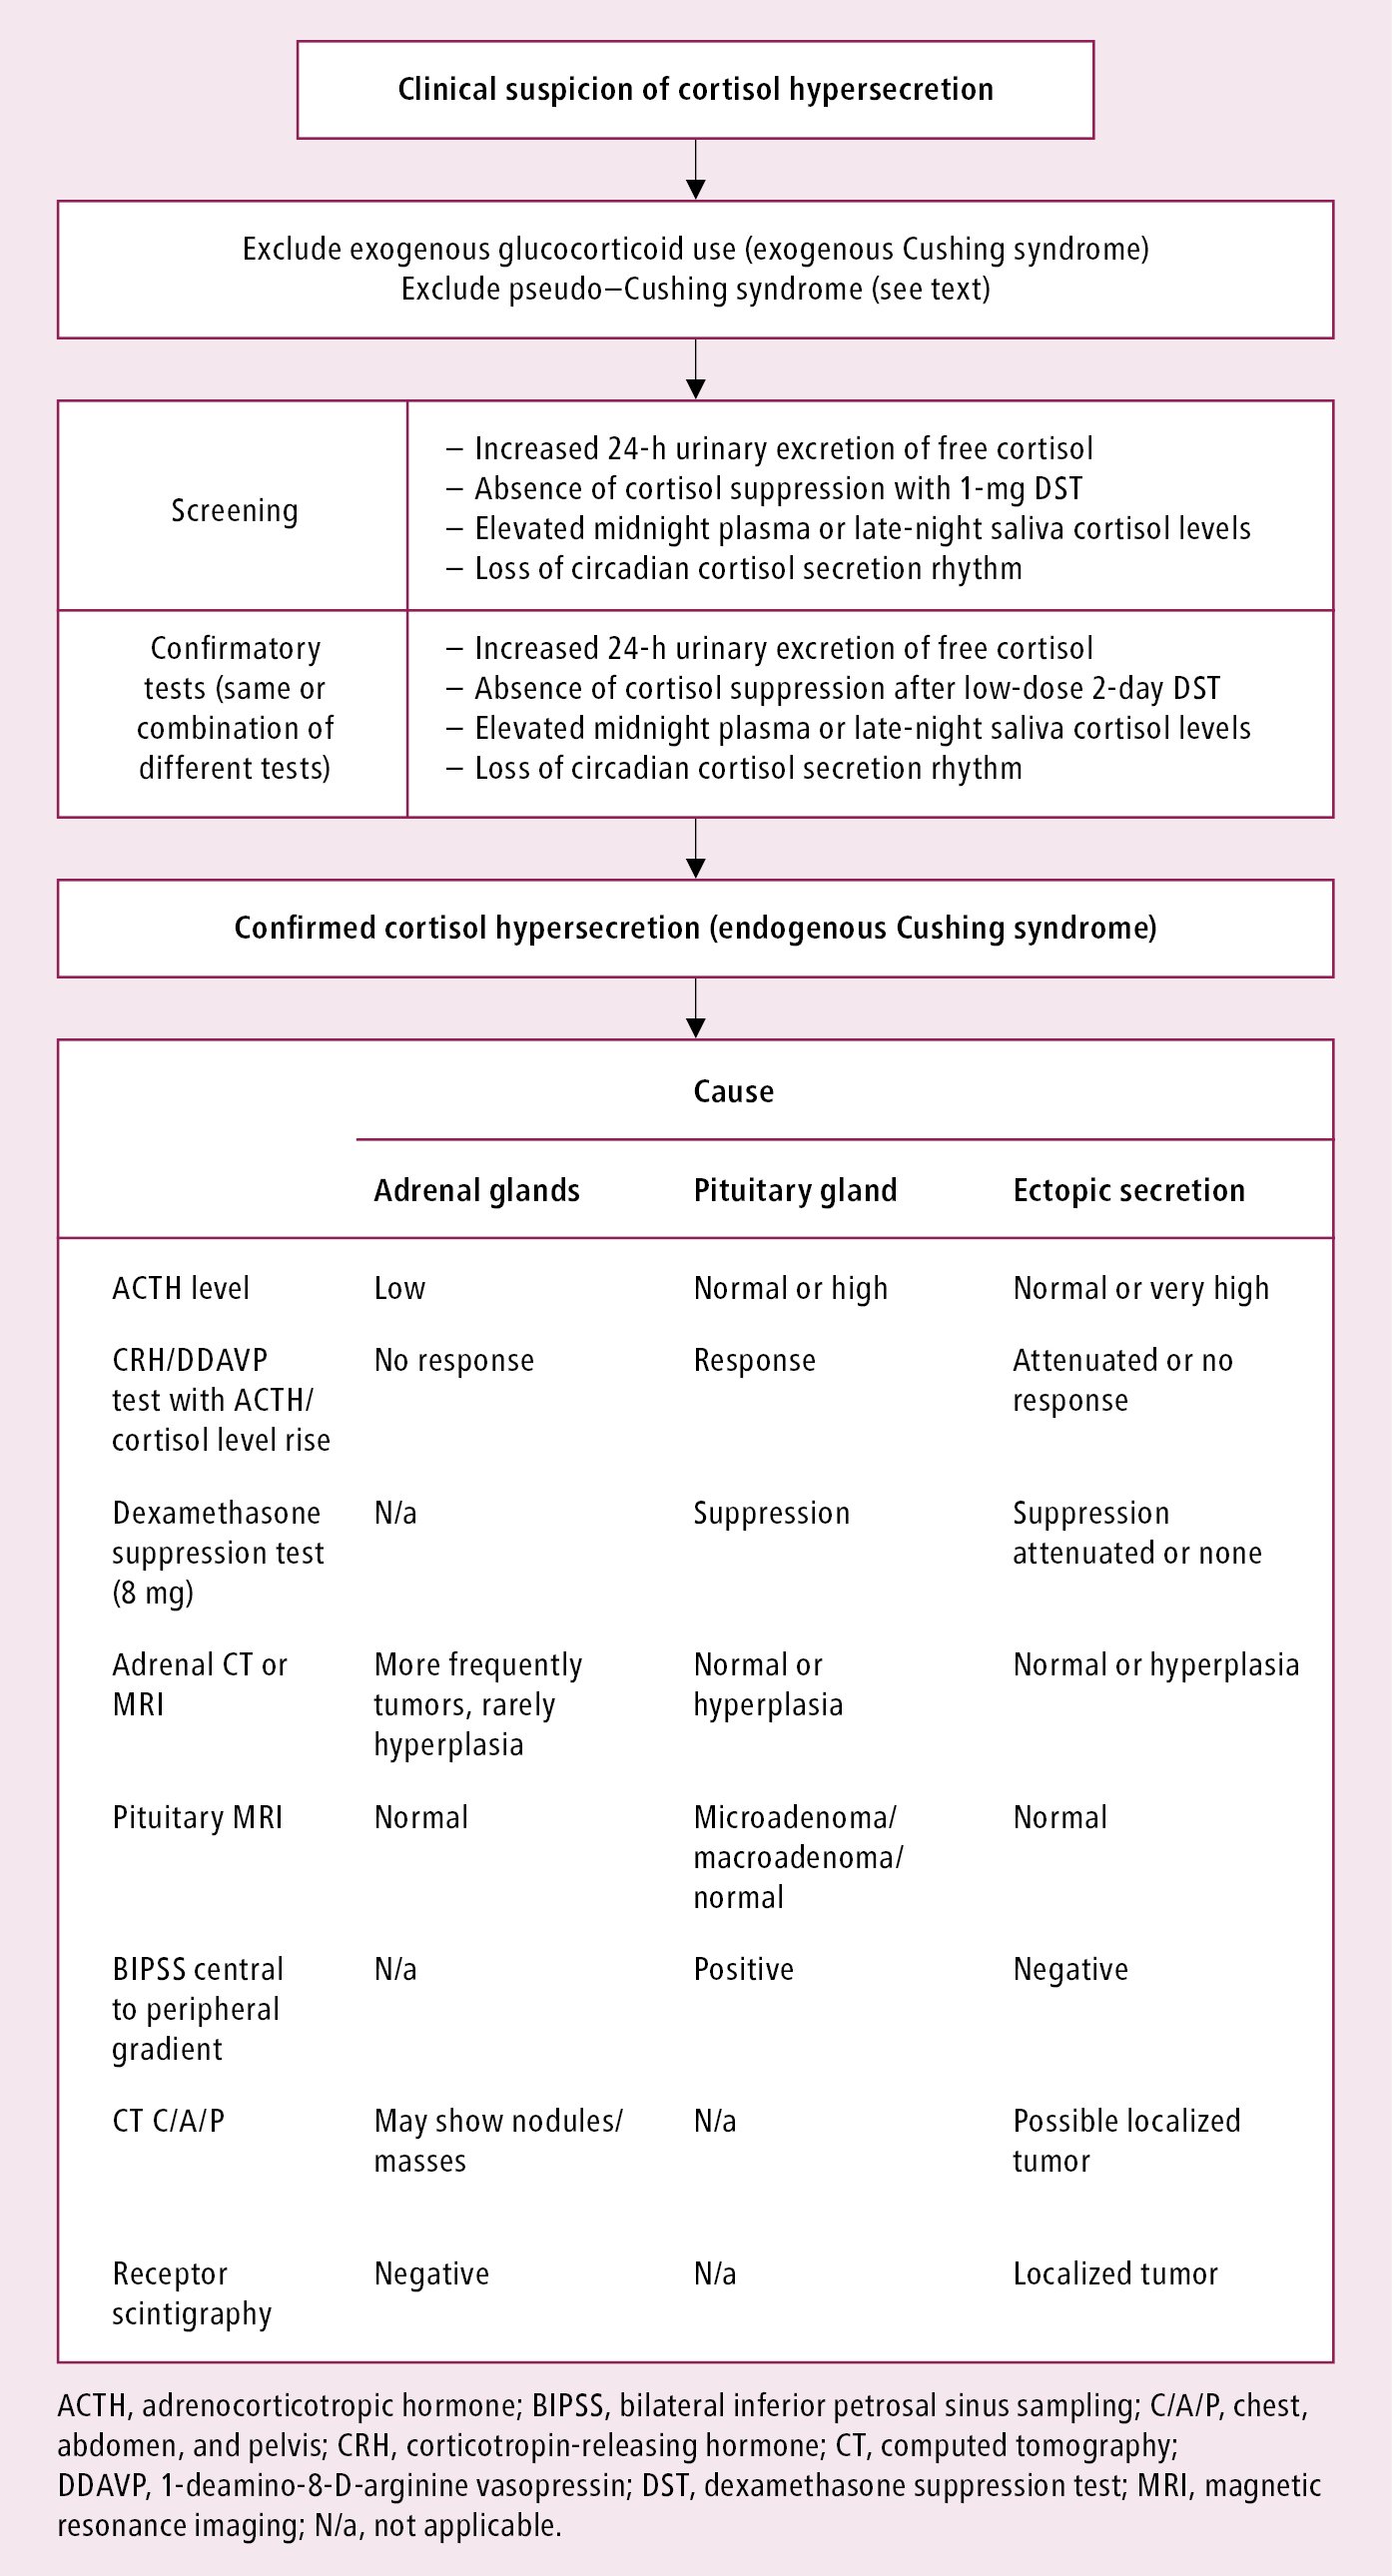 Figure 031_6191.  Diagnostic algorithm in Cushing syndrome. 